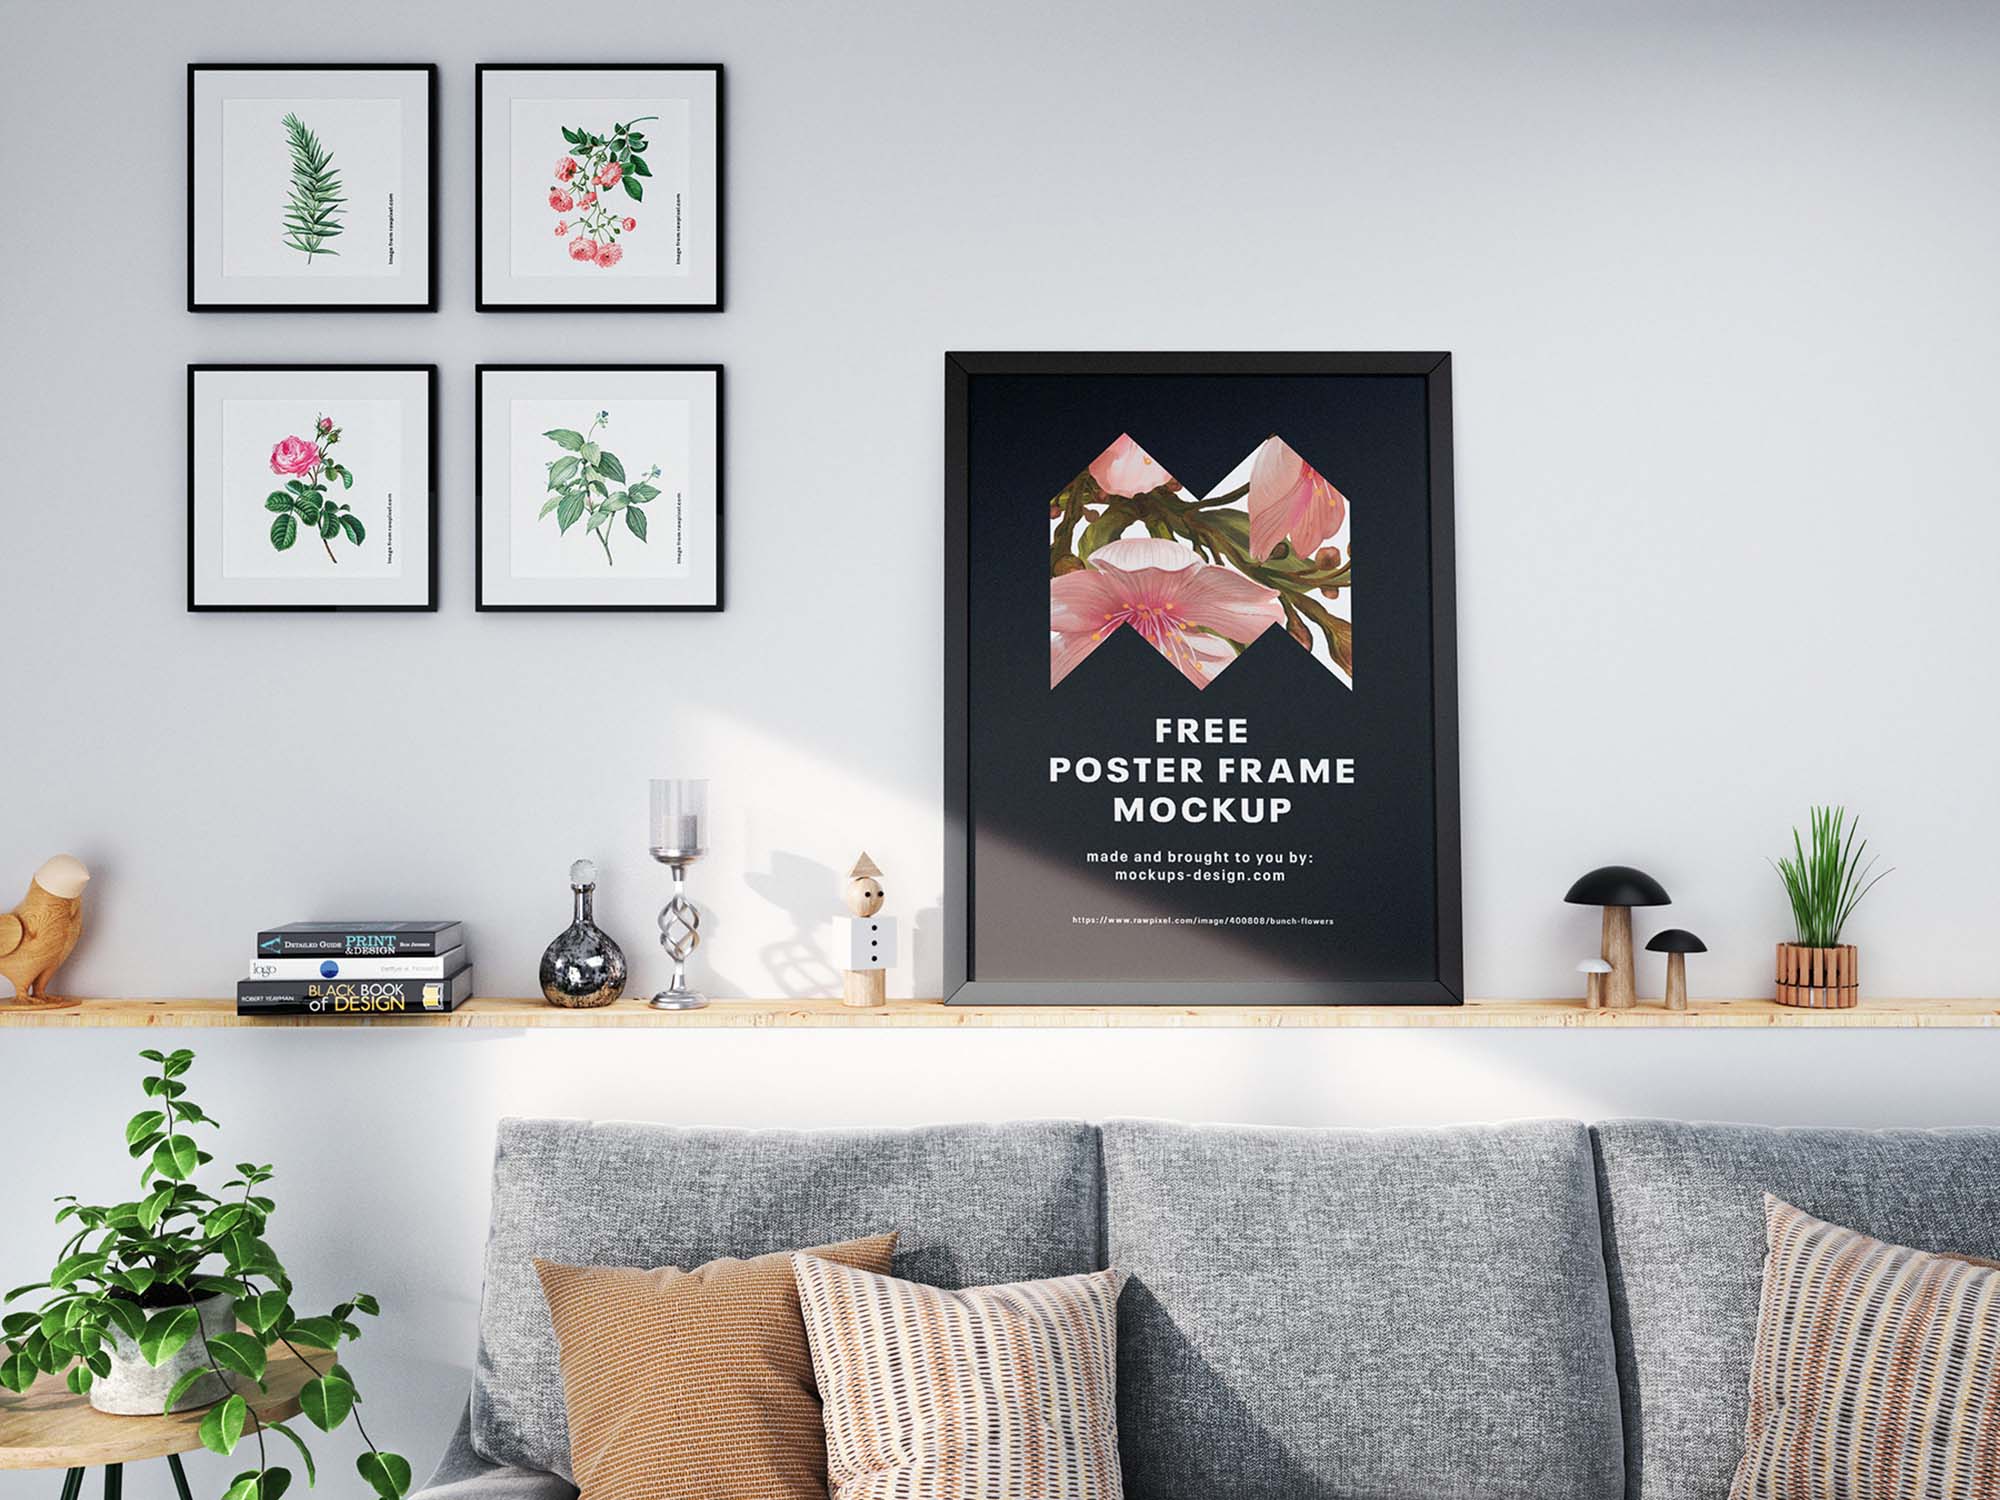 Realistic Poster Frame on the Wall in the Room Mockup